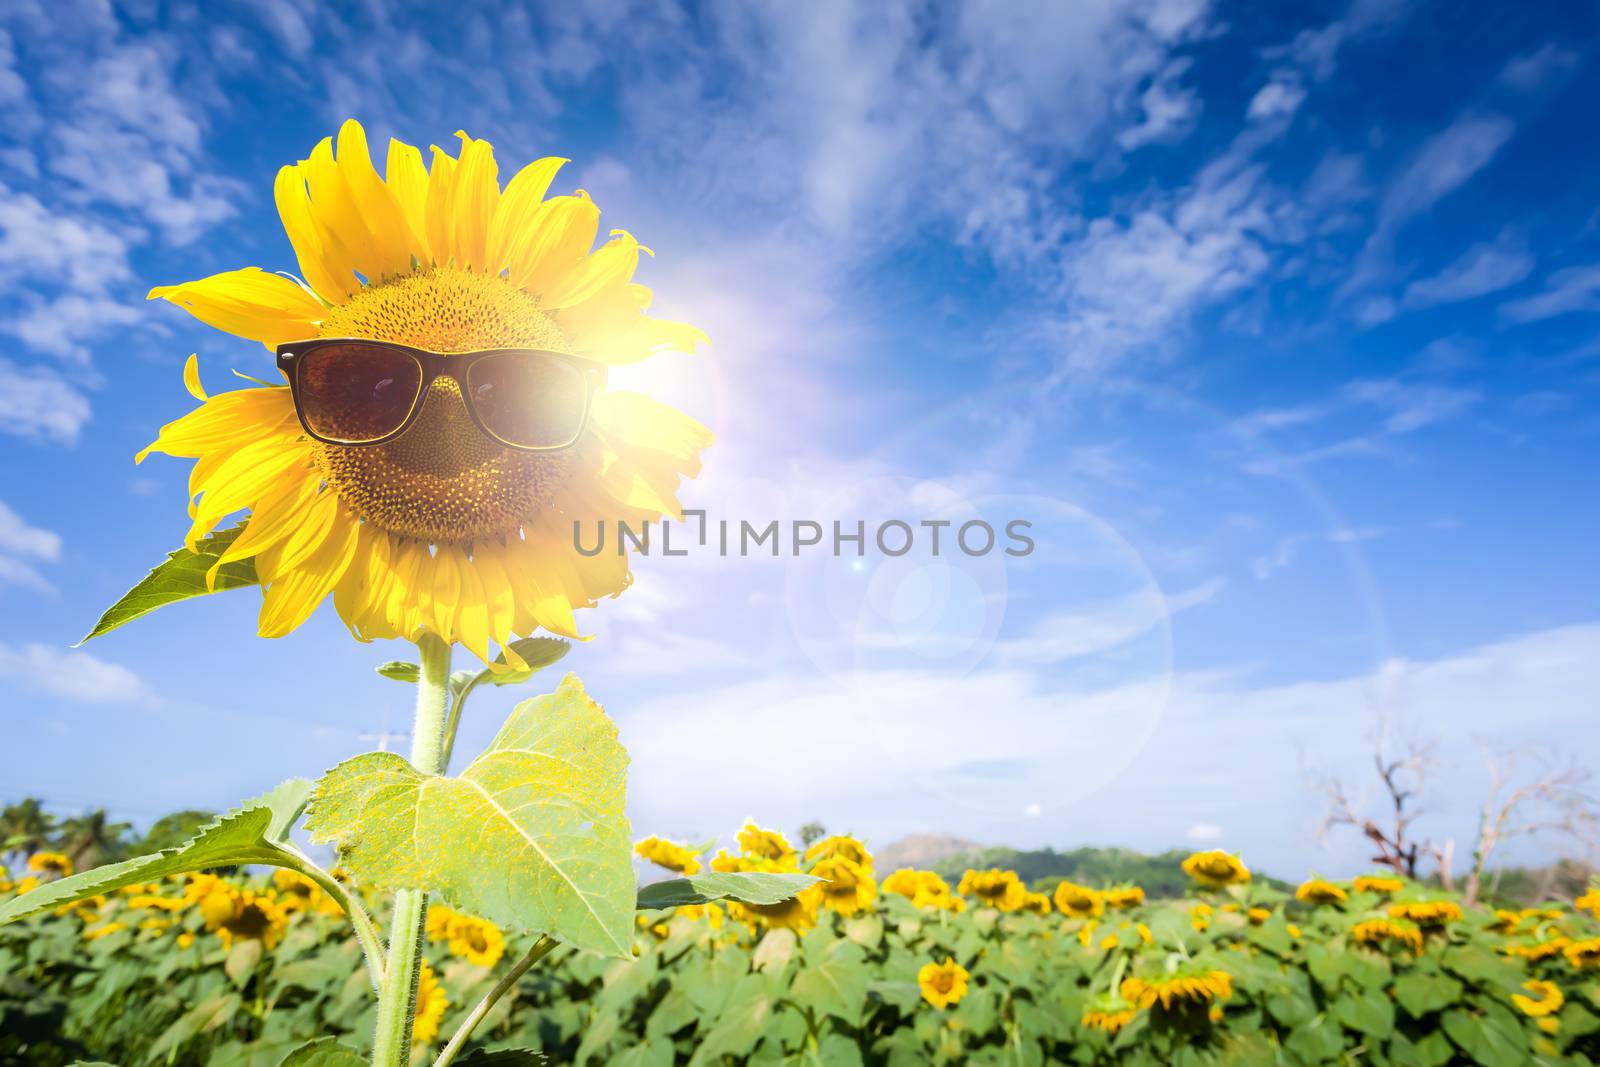 Field sunflower wear glasses protect the sun.